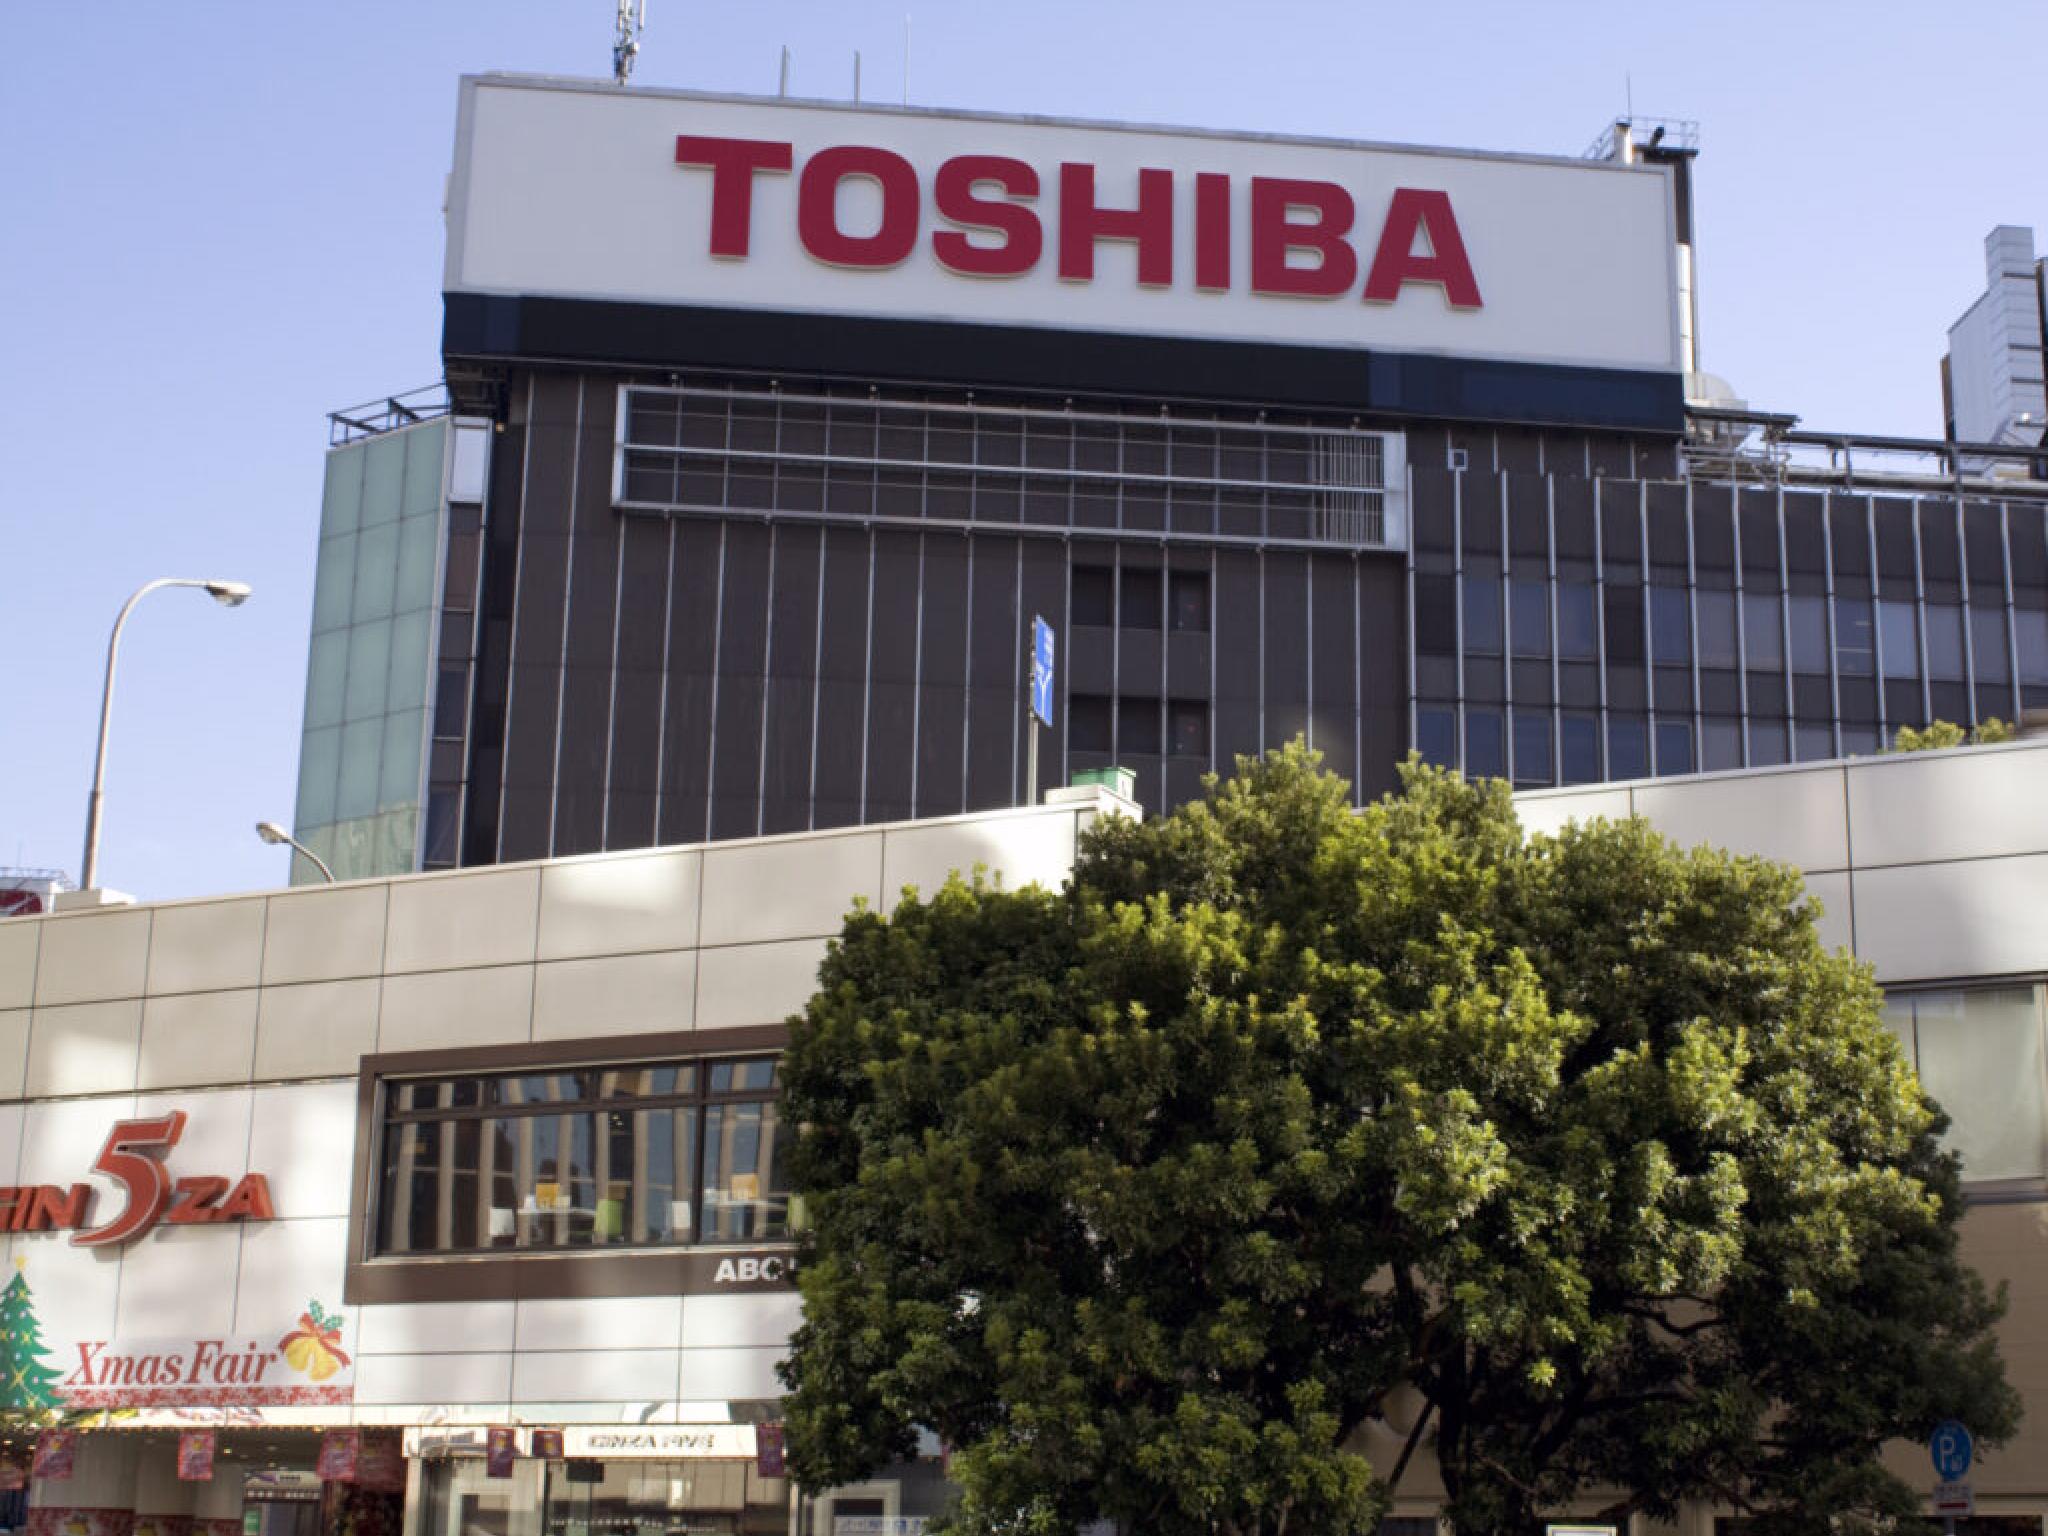  end-of-an-era-toshiba-delisted-from-tokyo-stock-exchange-after-74-years 